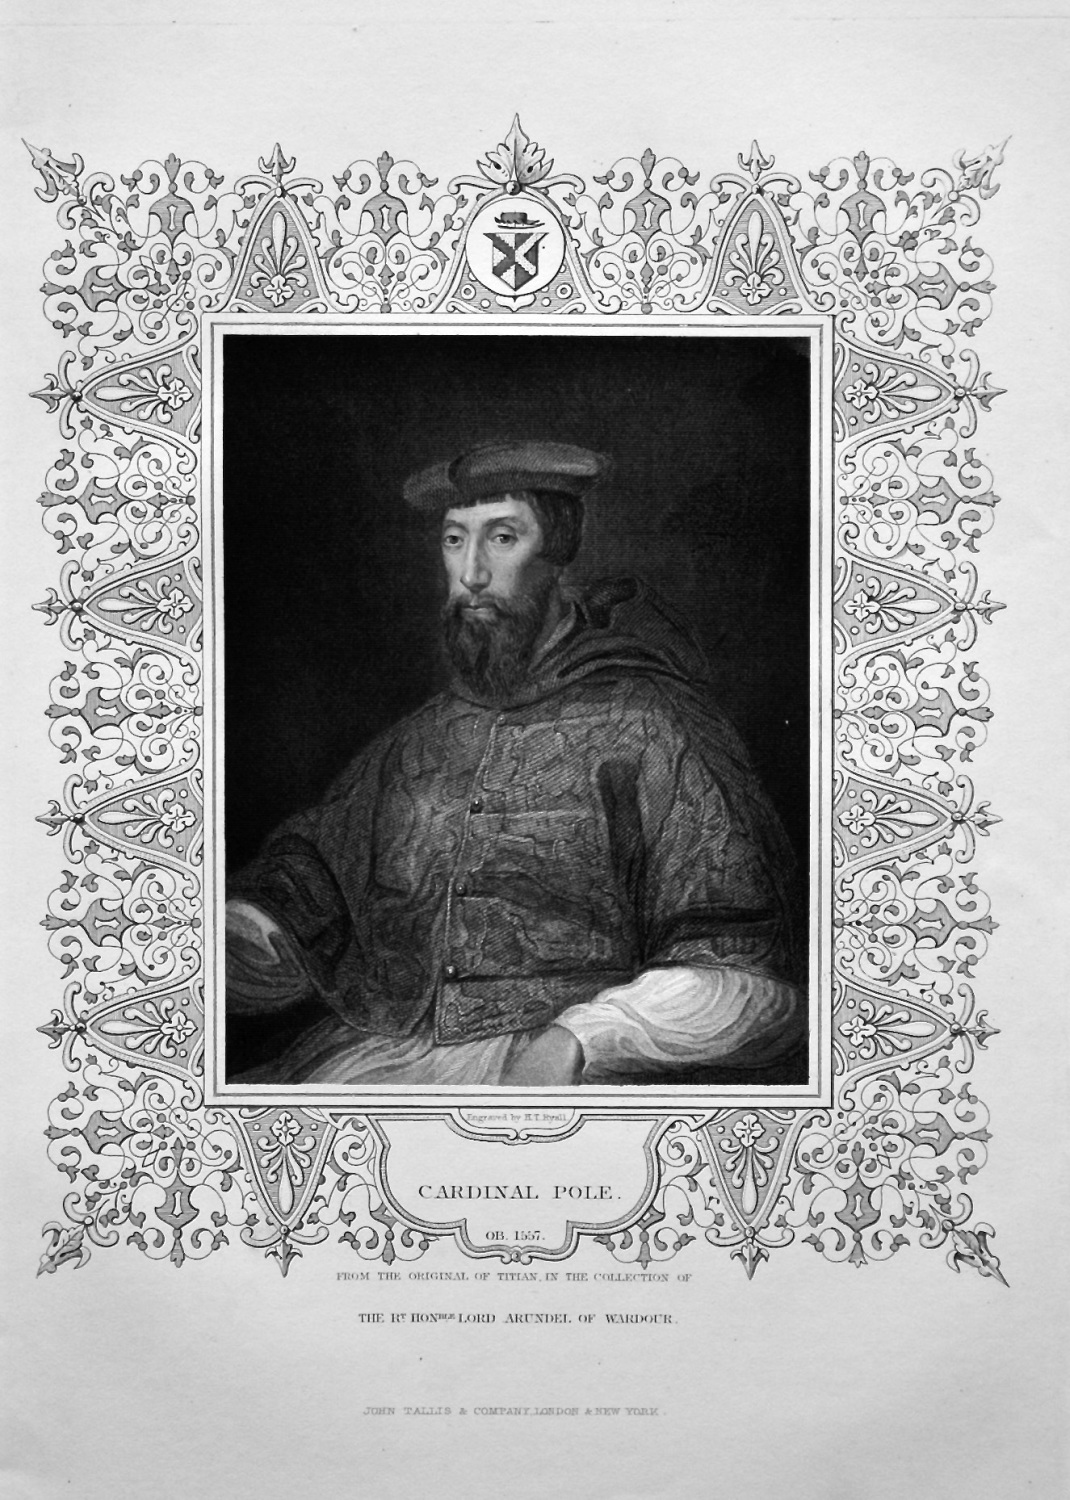 Cardinal Pole. OB. 1557. From the original of Titian, in the collection of 